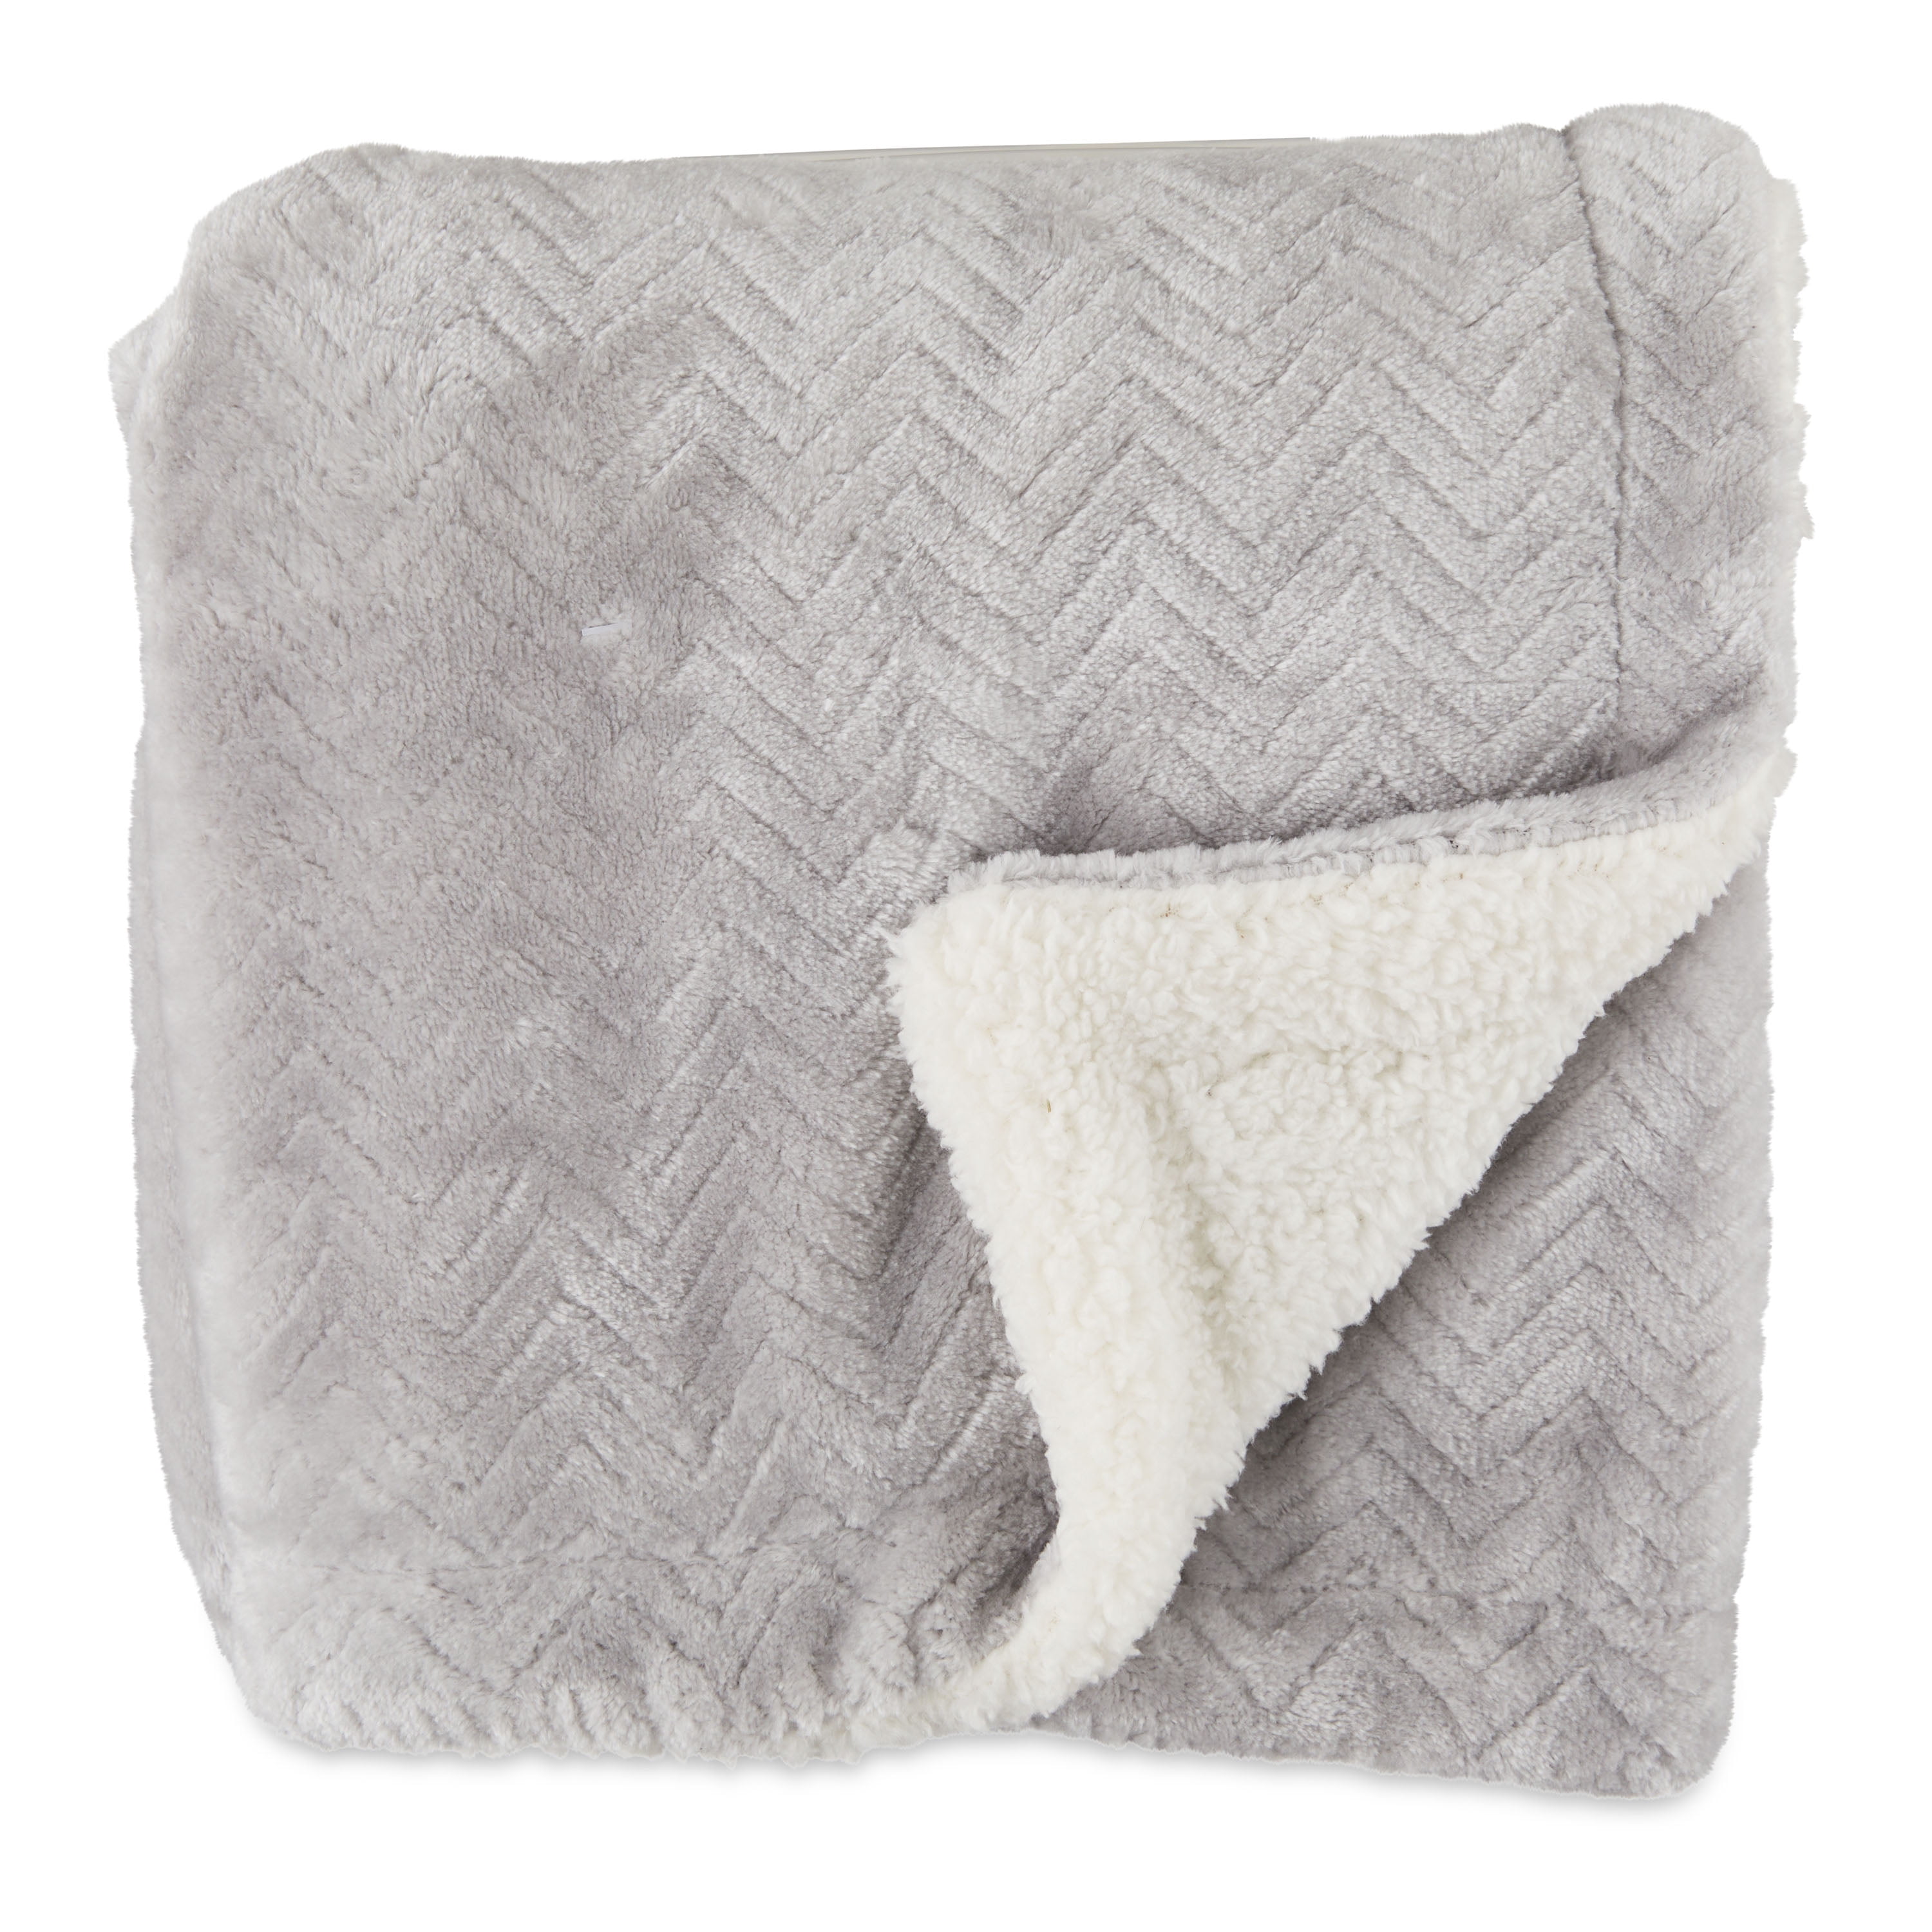 Parent's Royal Plush Blanket for Baby Boys and Girls, Gray, 30 x 40